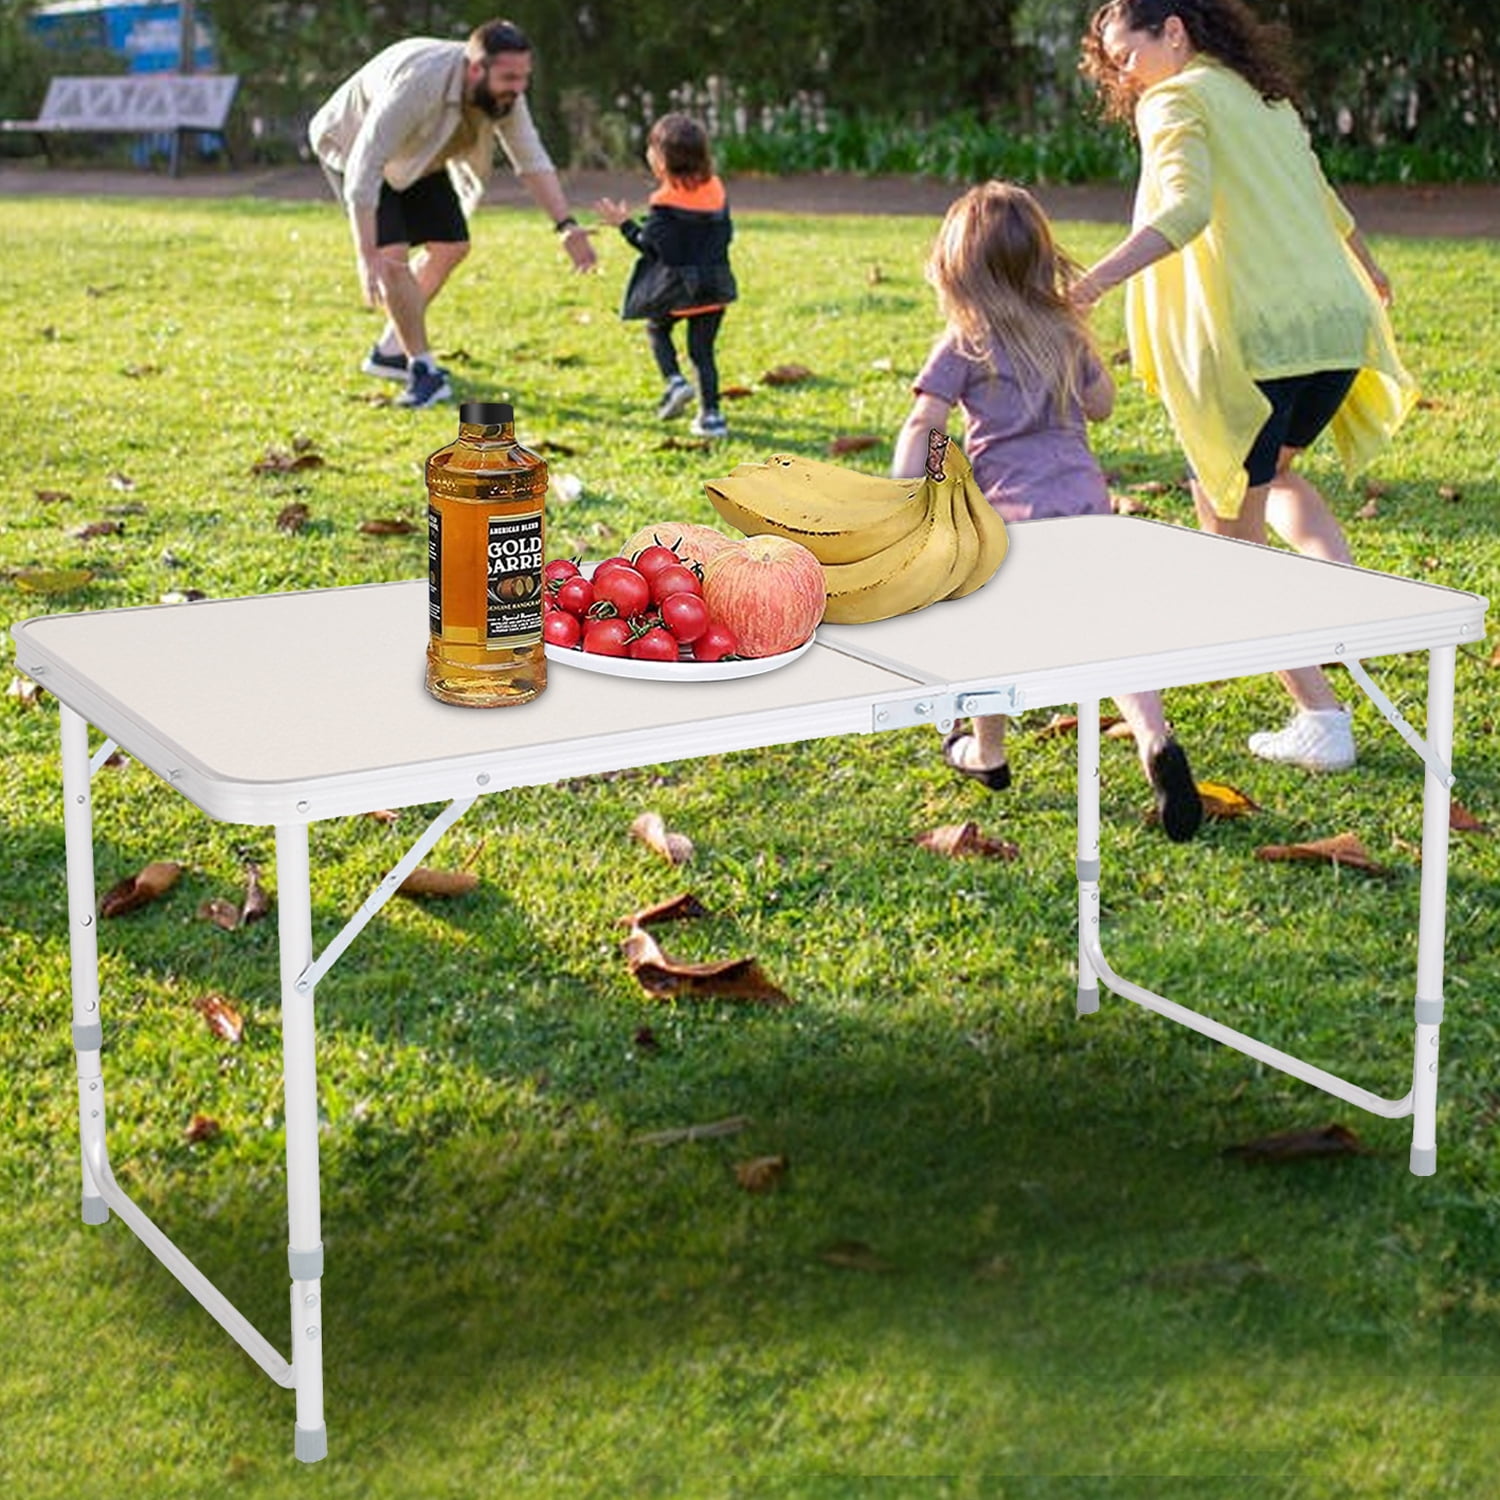 Camp Solutions Aluminum Folding Camping Table Adjustable Height Lightweight Portable Work Desk for Indoor Outdoor Picnic Party Dining Camping Meeting 